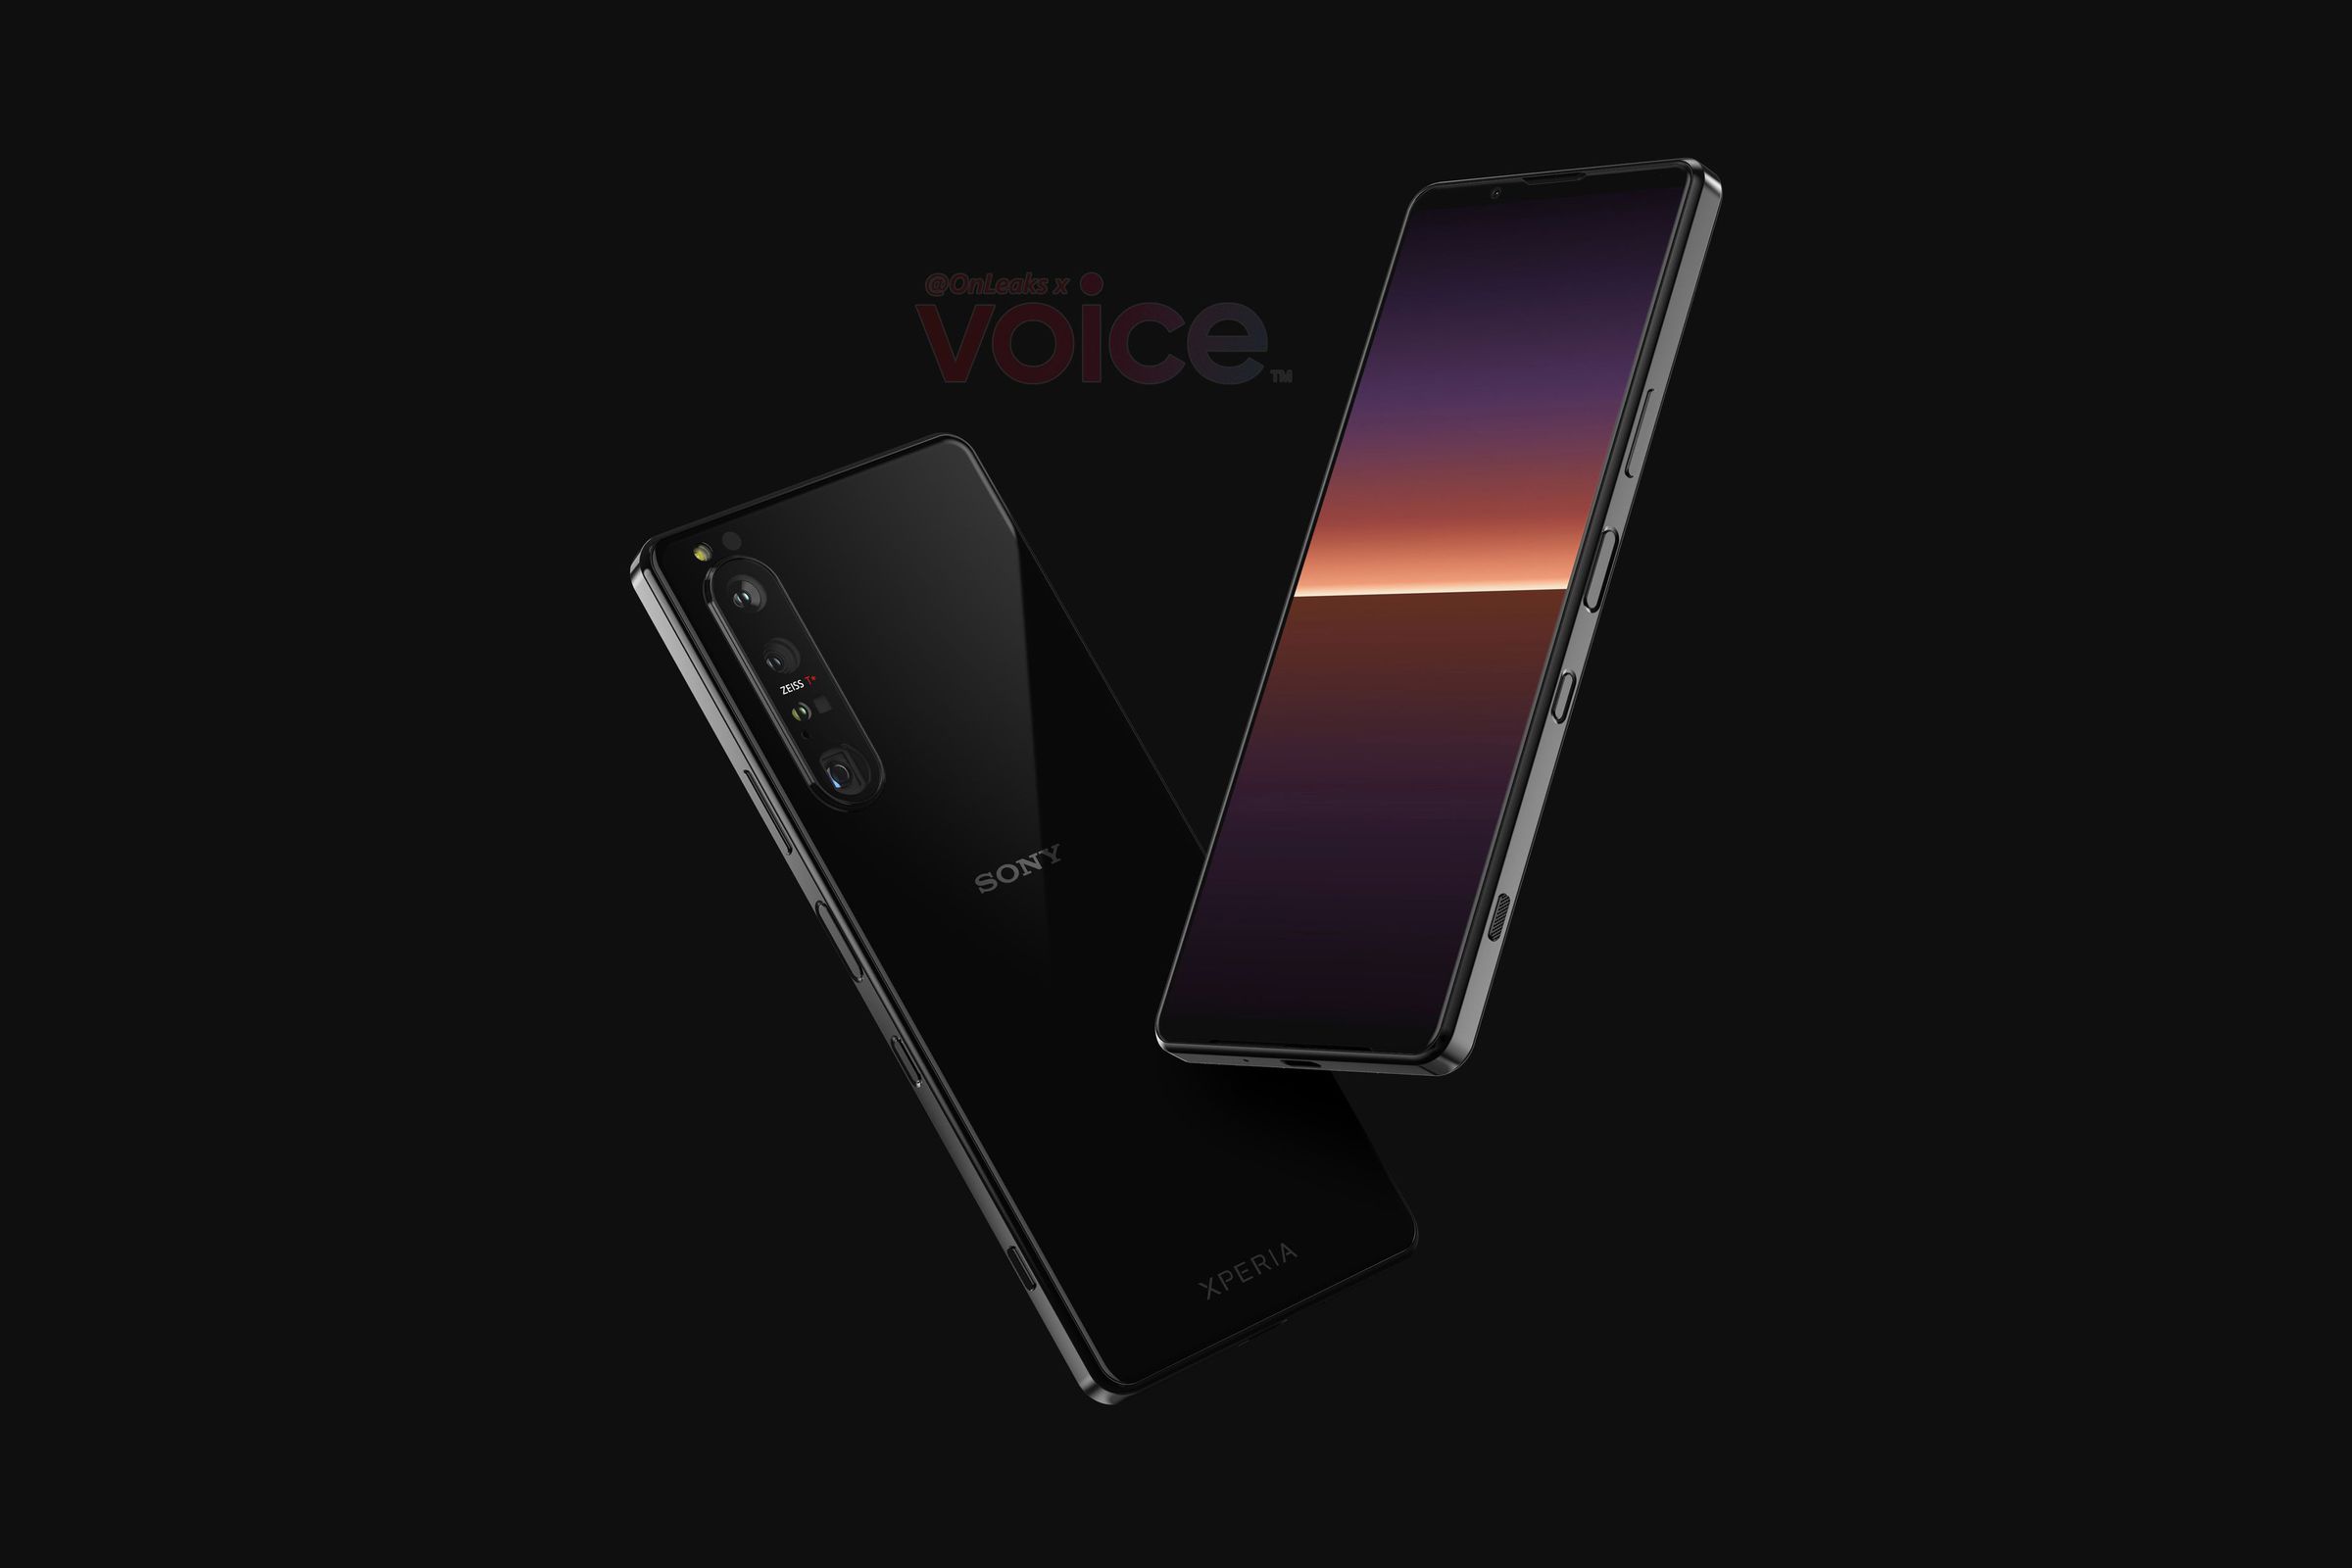 Alleged leaked renders of the upcoming flagship show Sony sticking with a minimalist design and tall form factor.